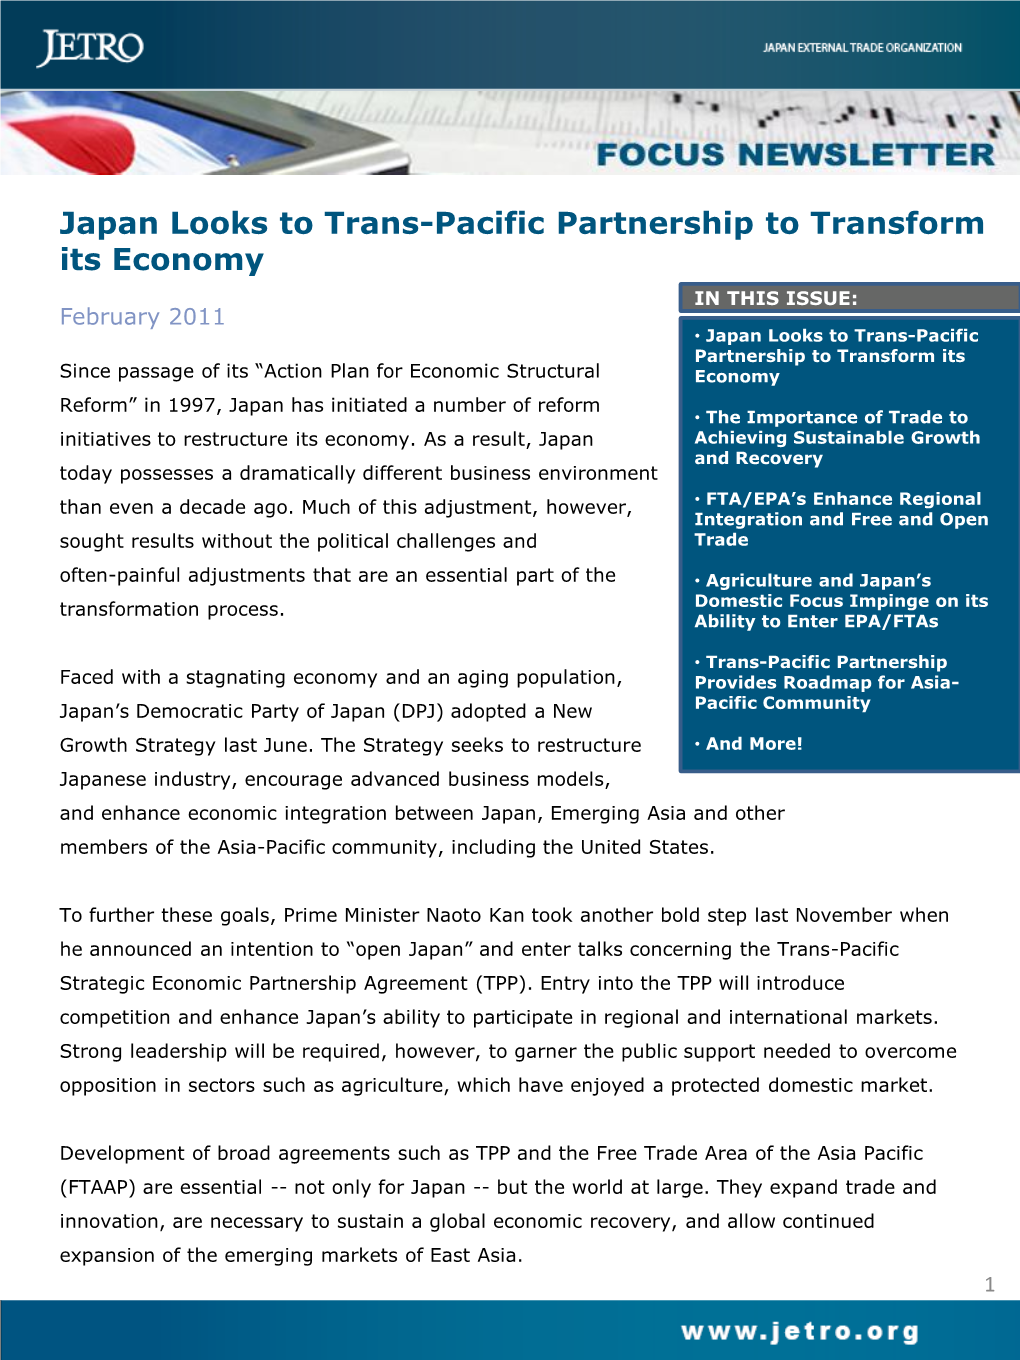 Japan Looks to Trans-Pacific Partnership to Transform Its Economy